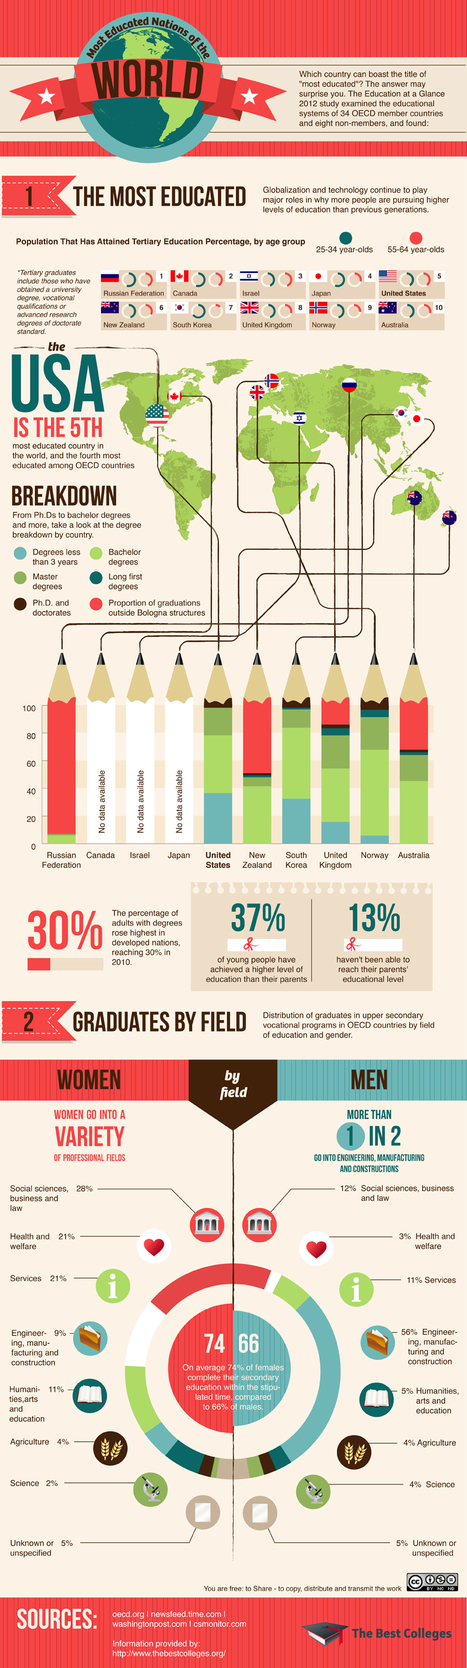 The Most Educated Nations in 2012 [Infographic] | 21st Century Tools for Teaching-People and Learners | Scoop.it